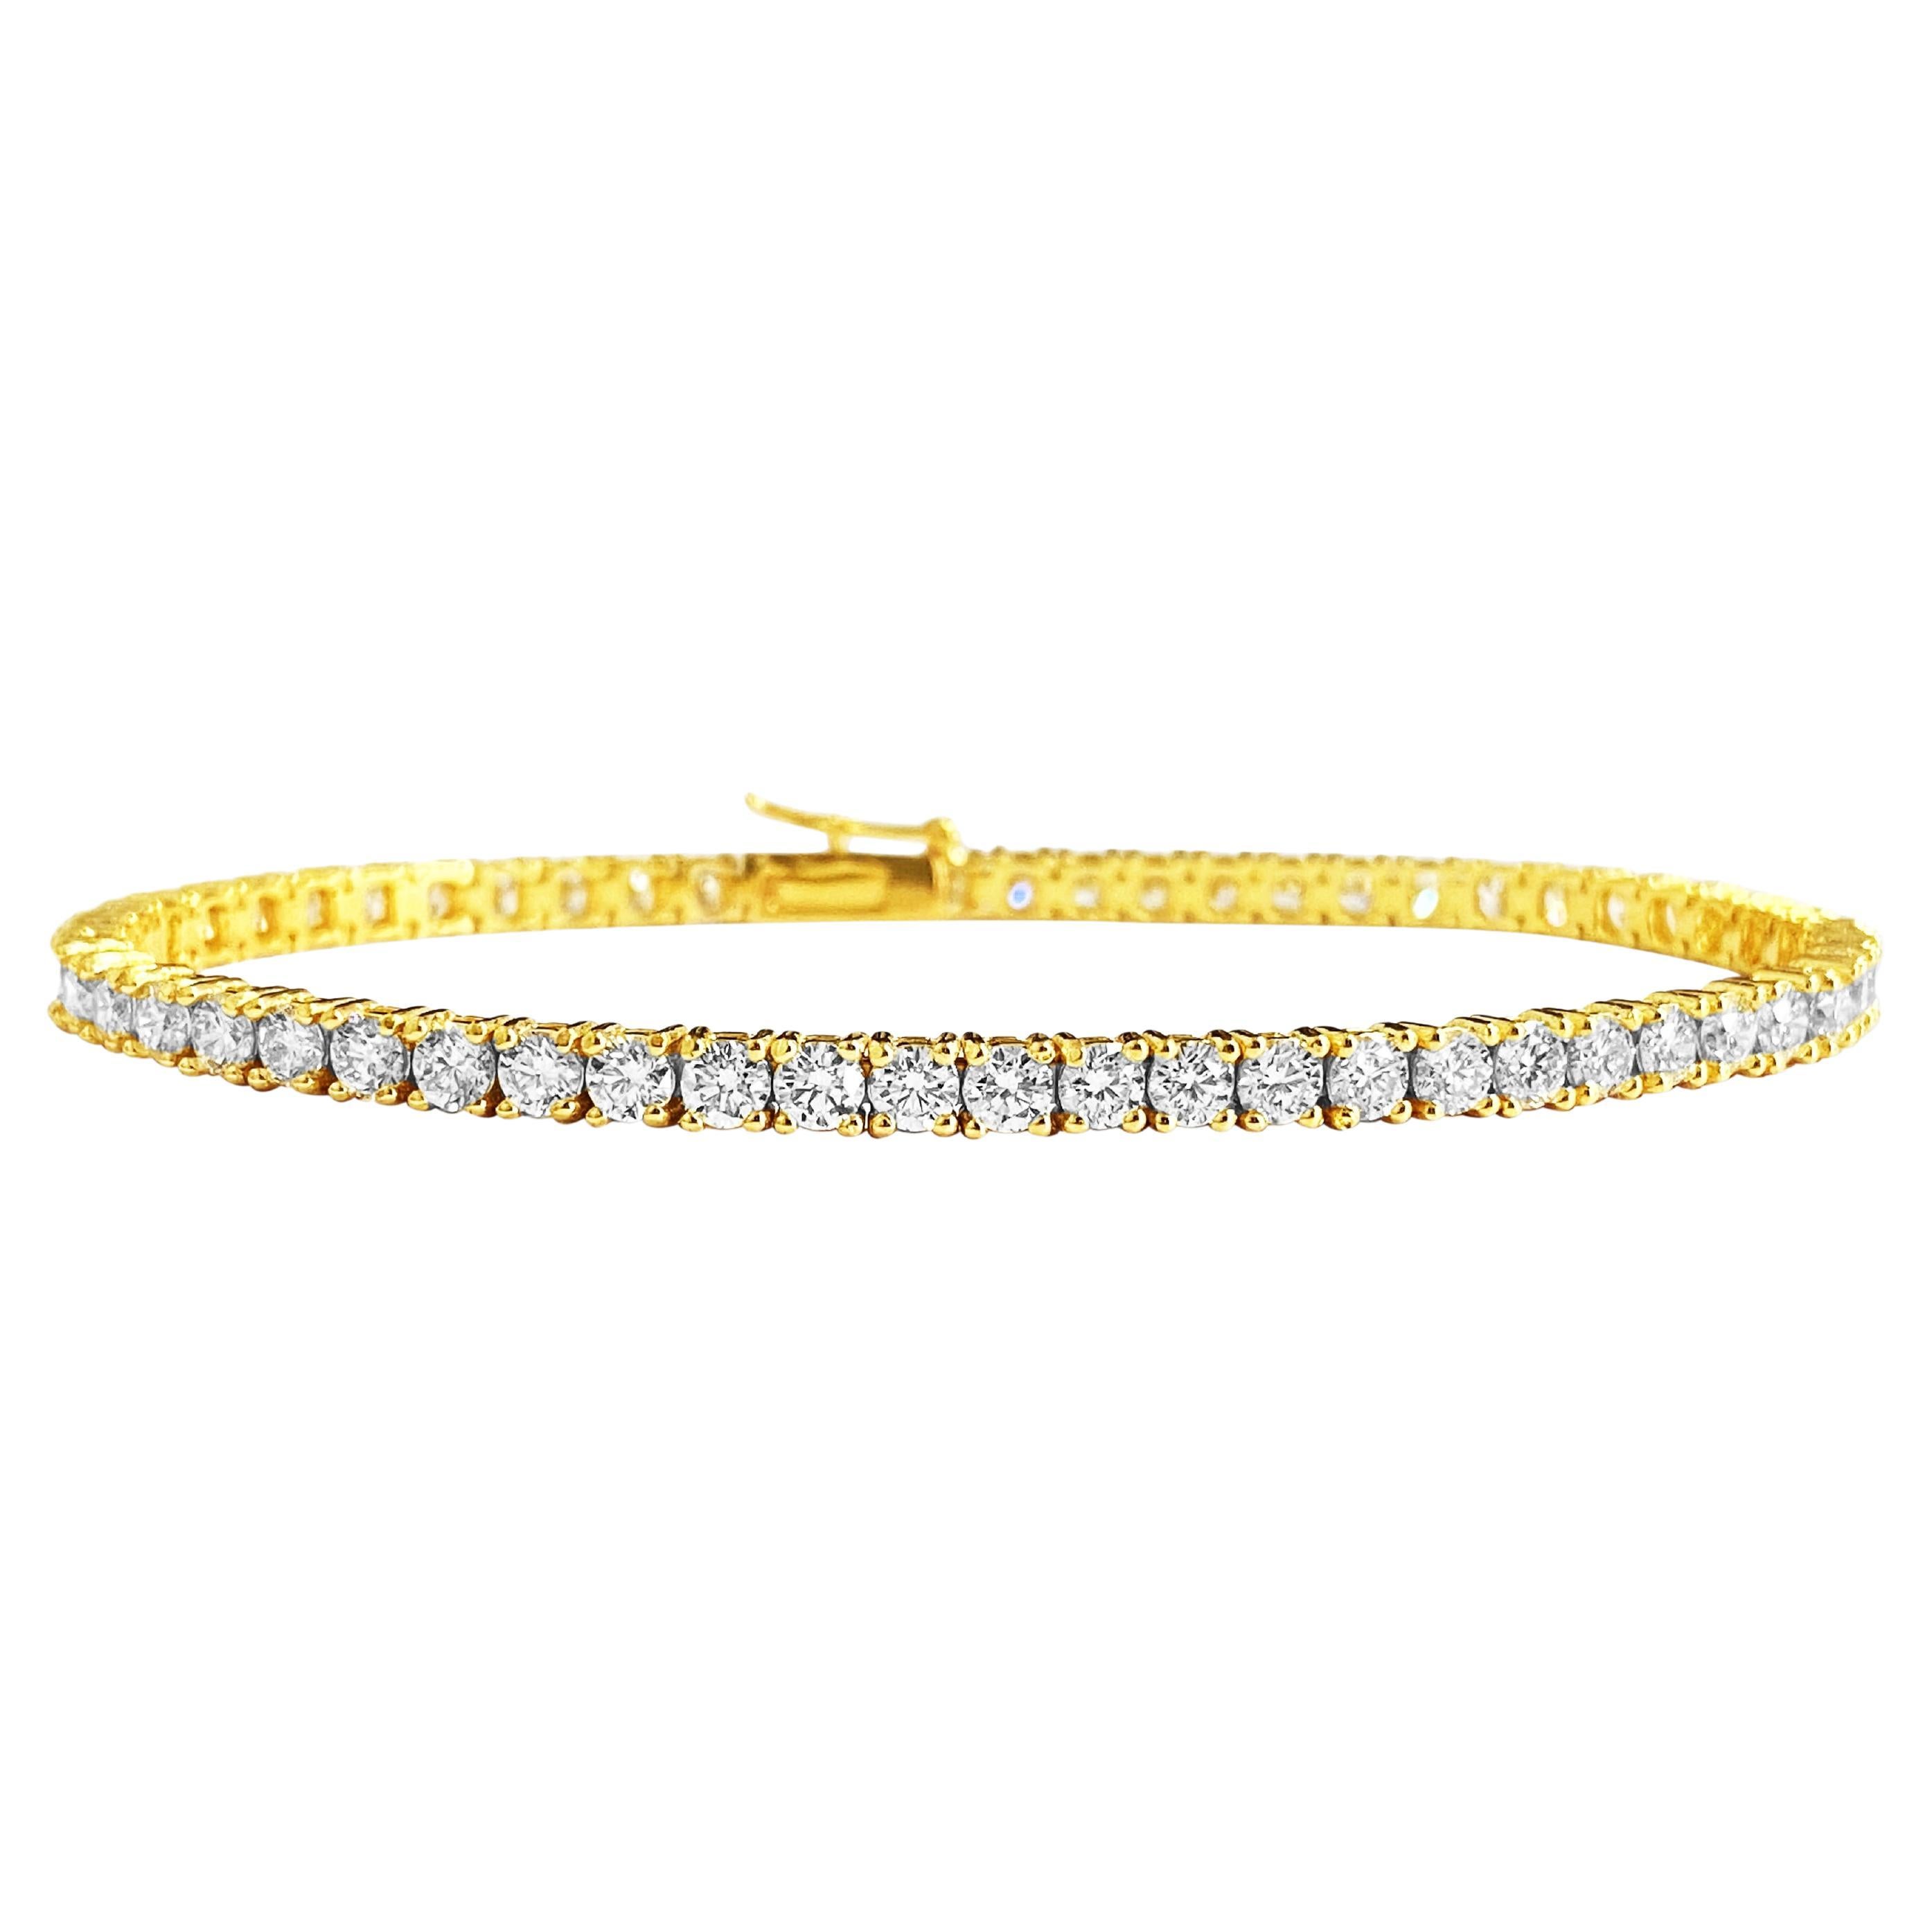 What is the significance of a diamond tennis bracelet?